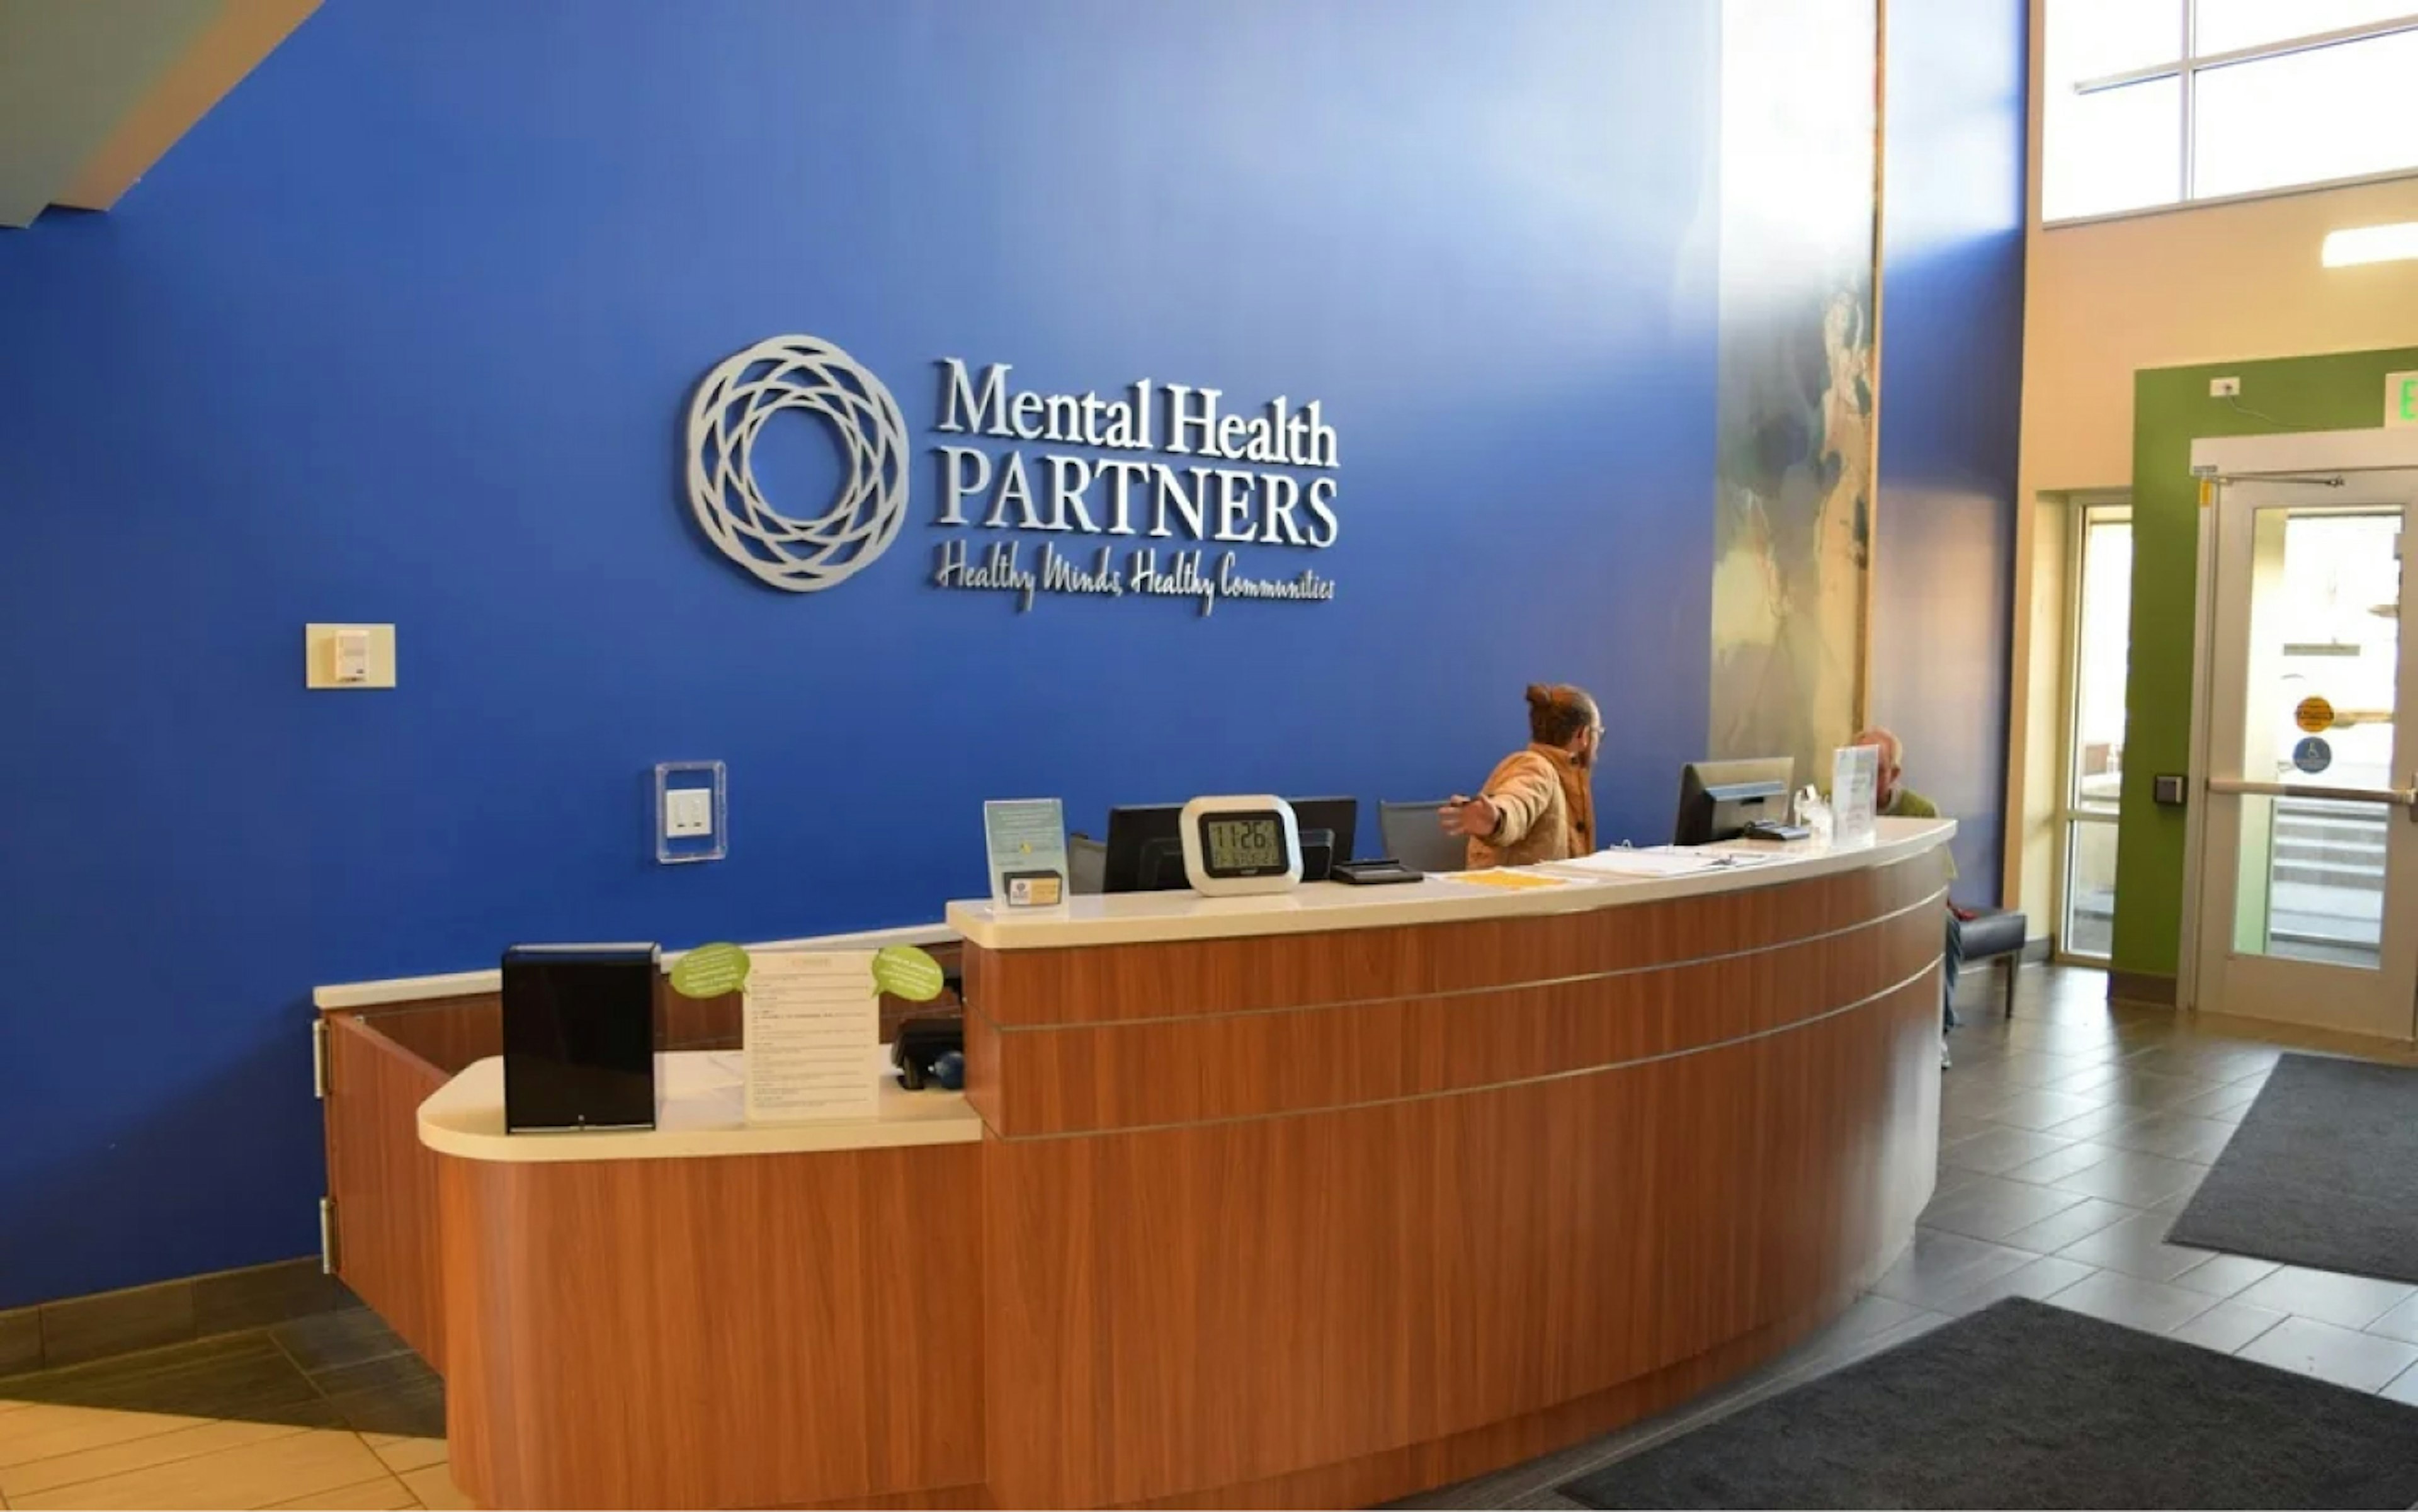 Ryan Wellness Center front desk. Featuring blue accent wall with Mental health Partners logo.